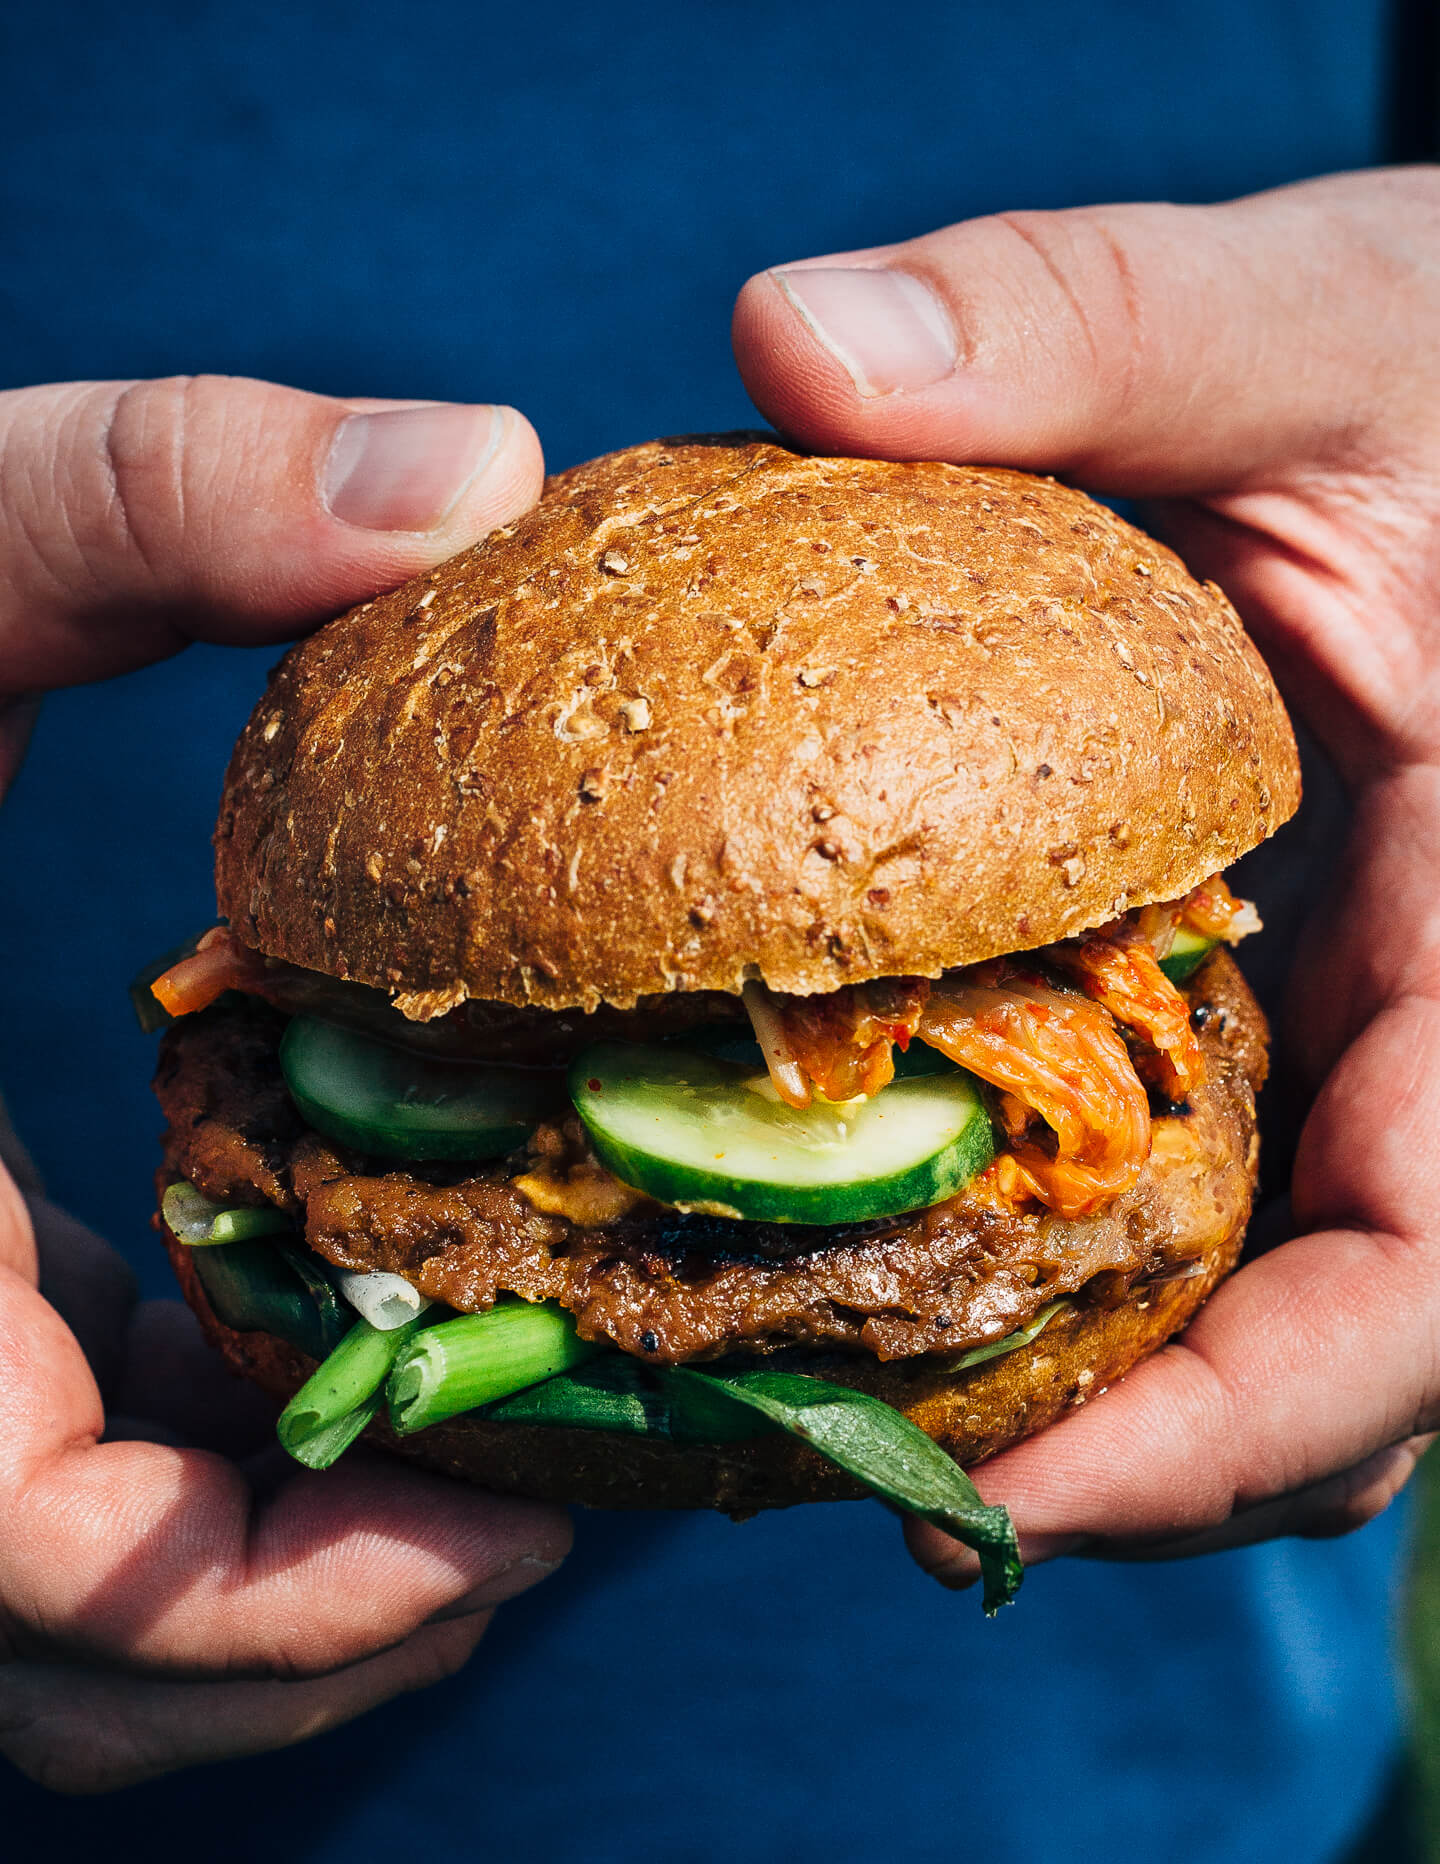 A fresh spin on the traditional tailgating party featuring plant-based kimchi burgers topped with grilled green onions and a spicy gochujang sunflower spread.